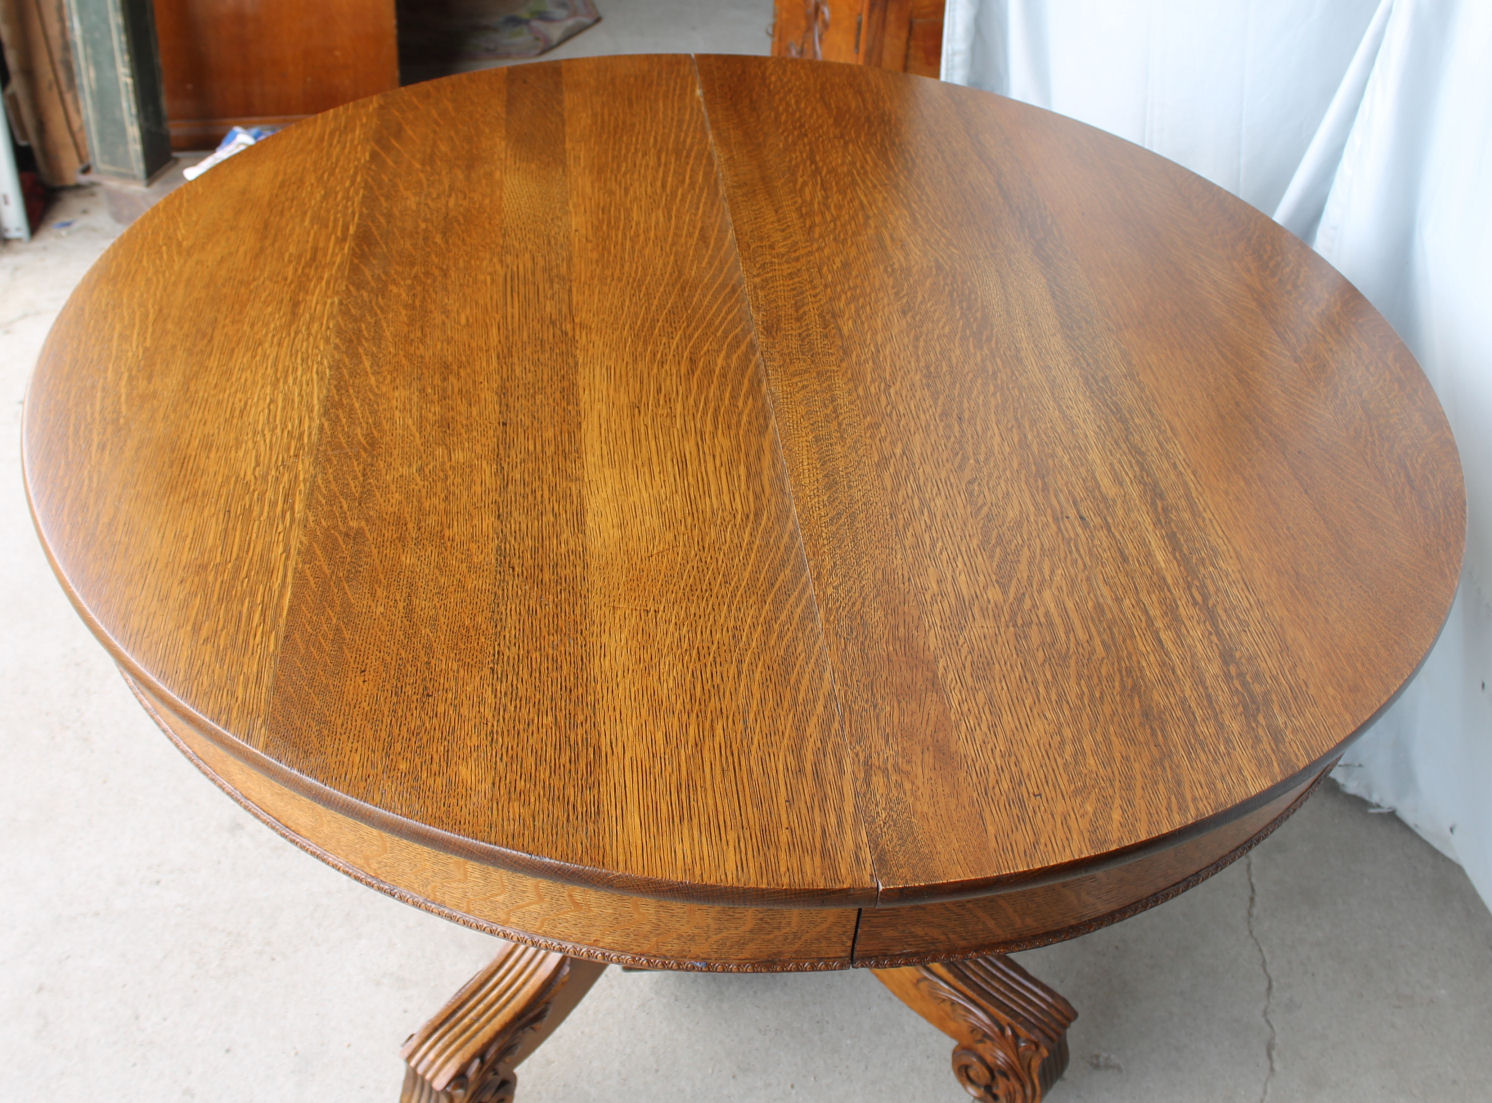 Bargain John's Antiques | Antique Round Oak Dining Table - 45 inches